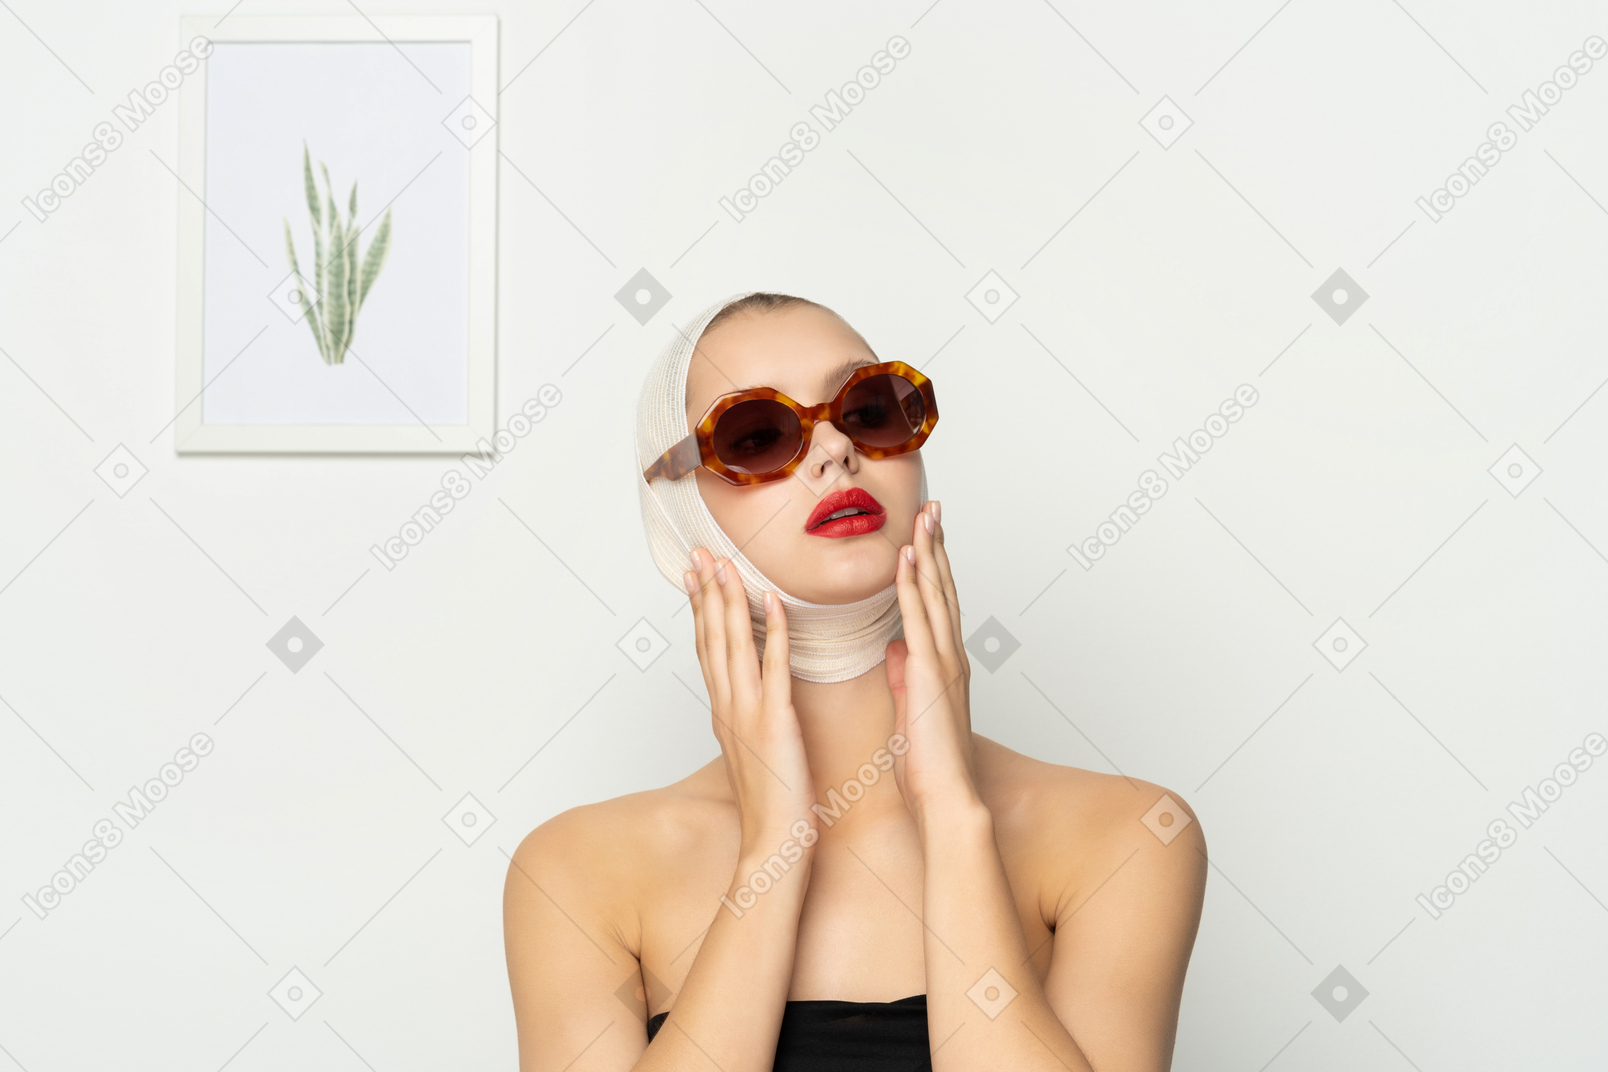 Woman with bandaged head wearing sunglasses